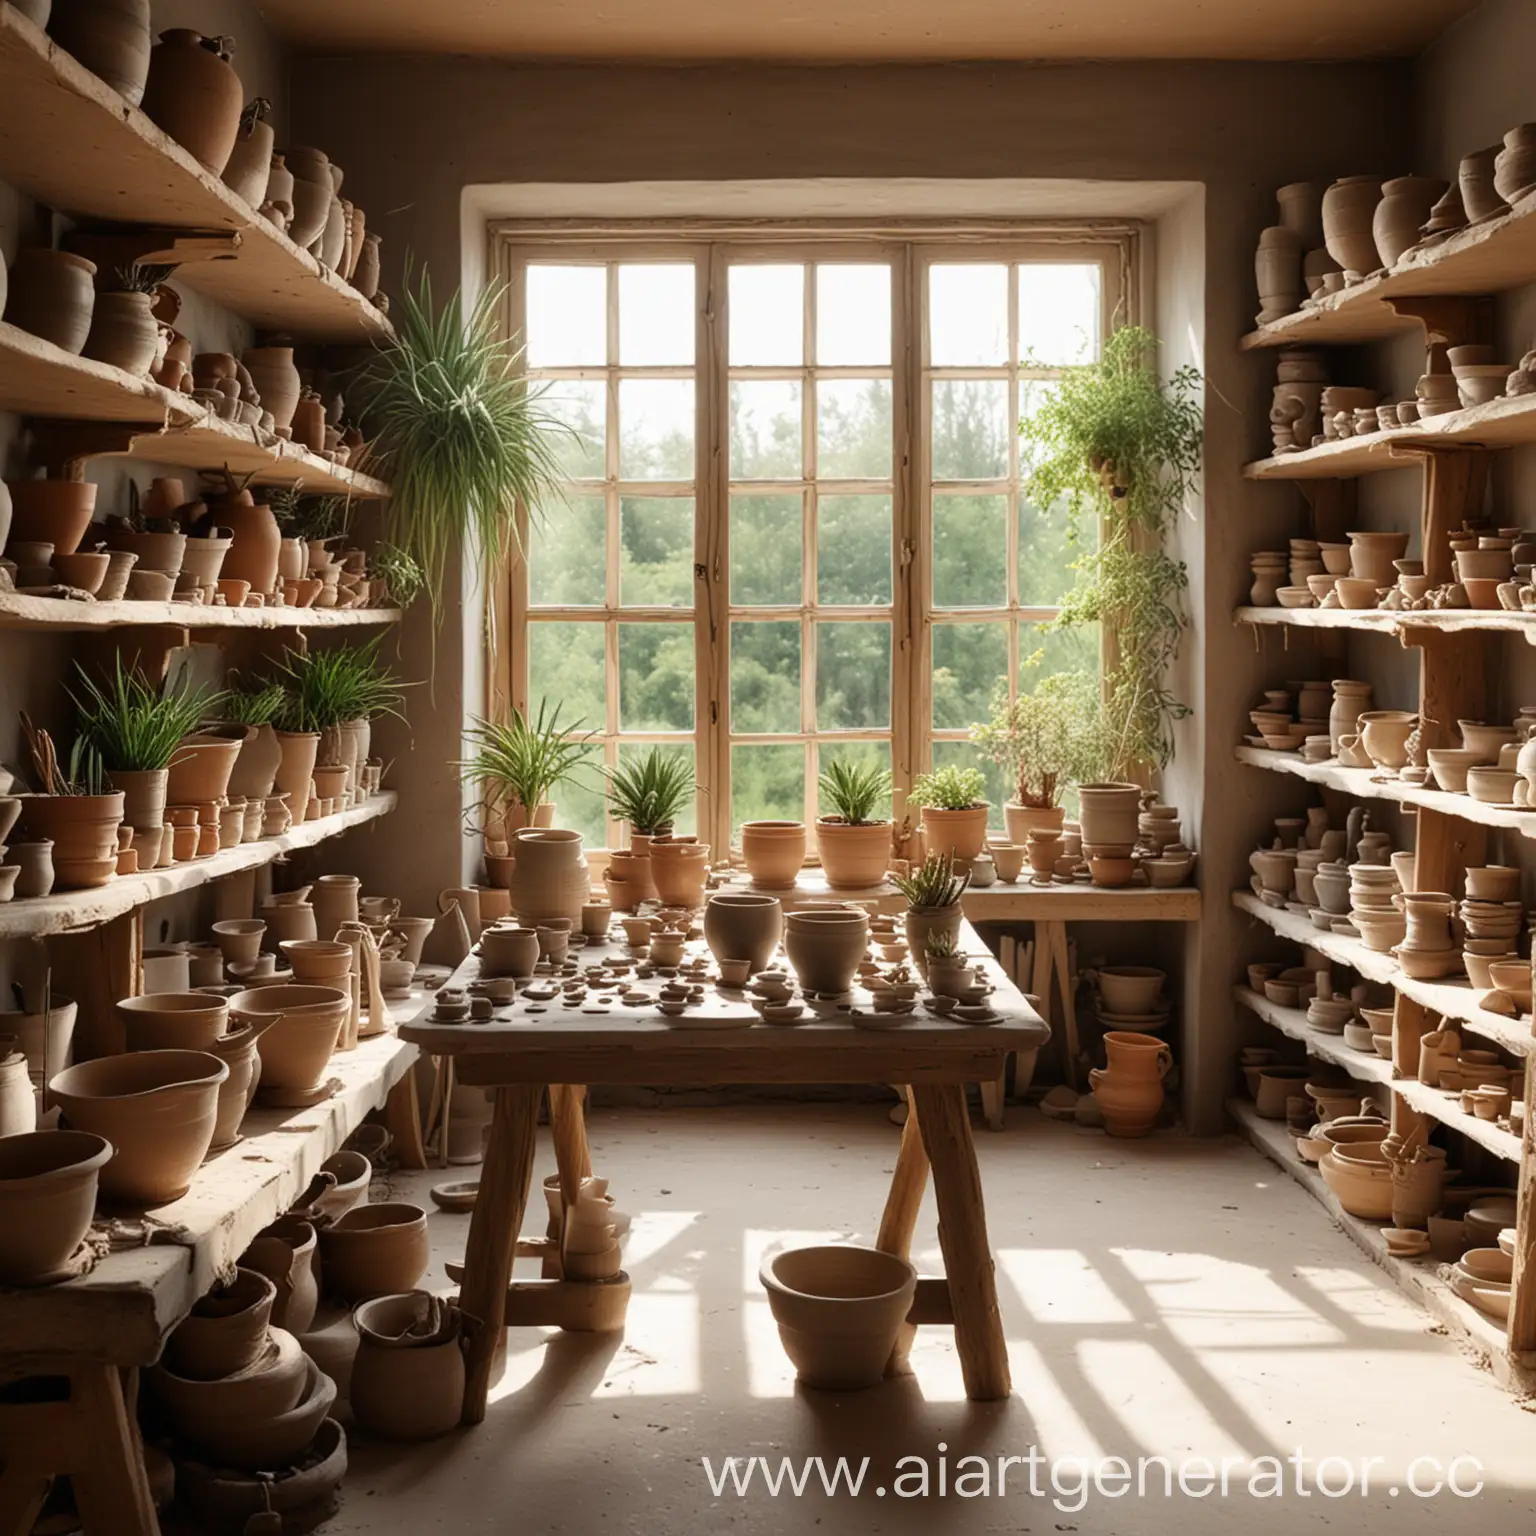 Vibrant-Pottery-Workshop-Potters-Wheel-and-Clay-Artifacts-in-Natural-Light